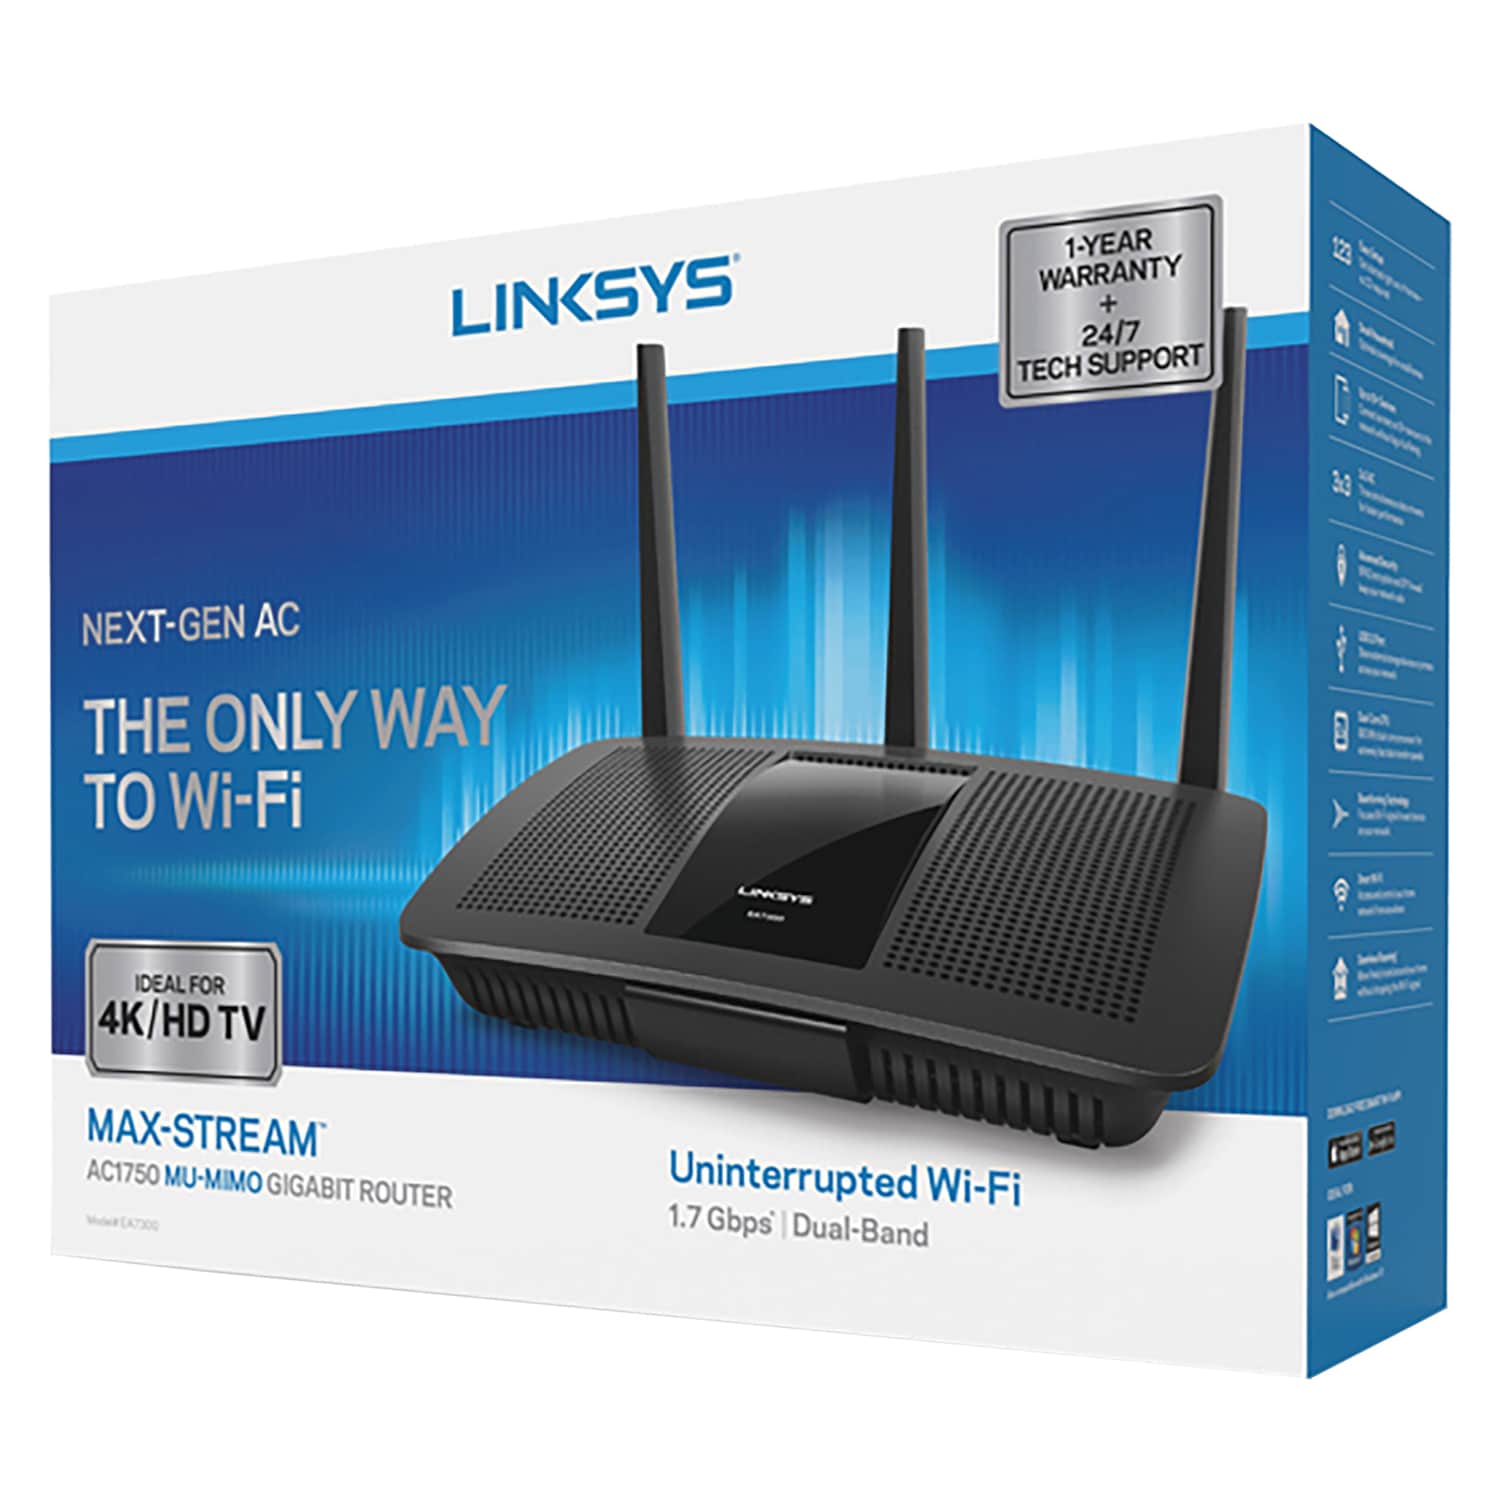 Linksys Max-Stream Wireless Router the Wi-Fi Routers department at